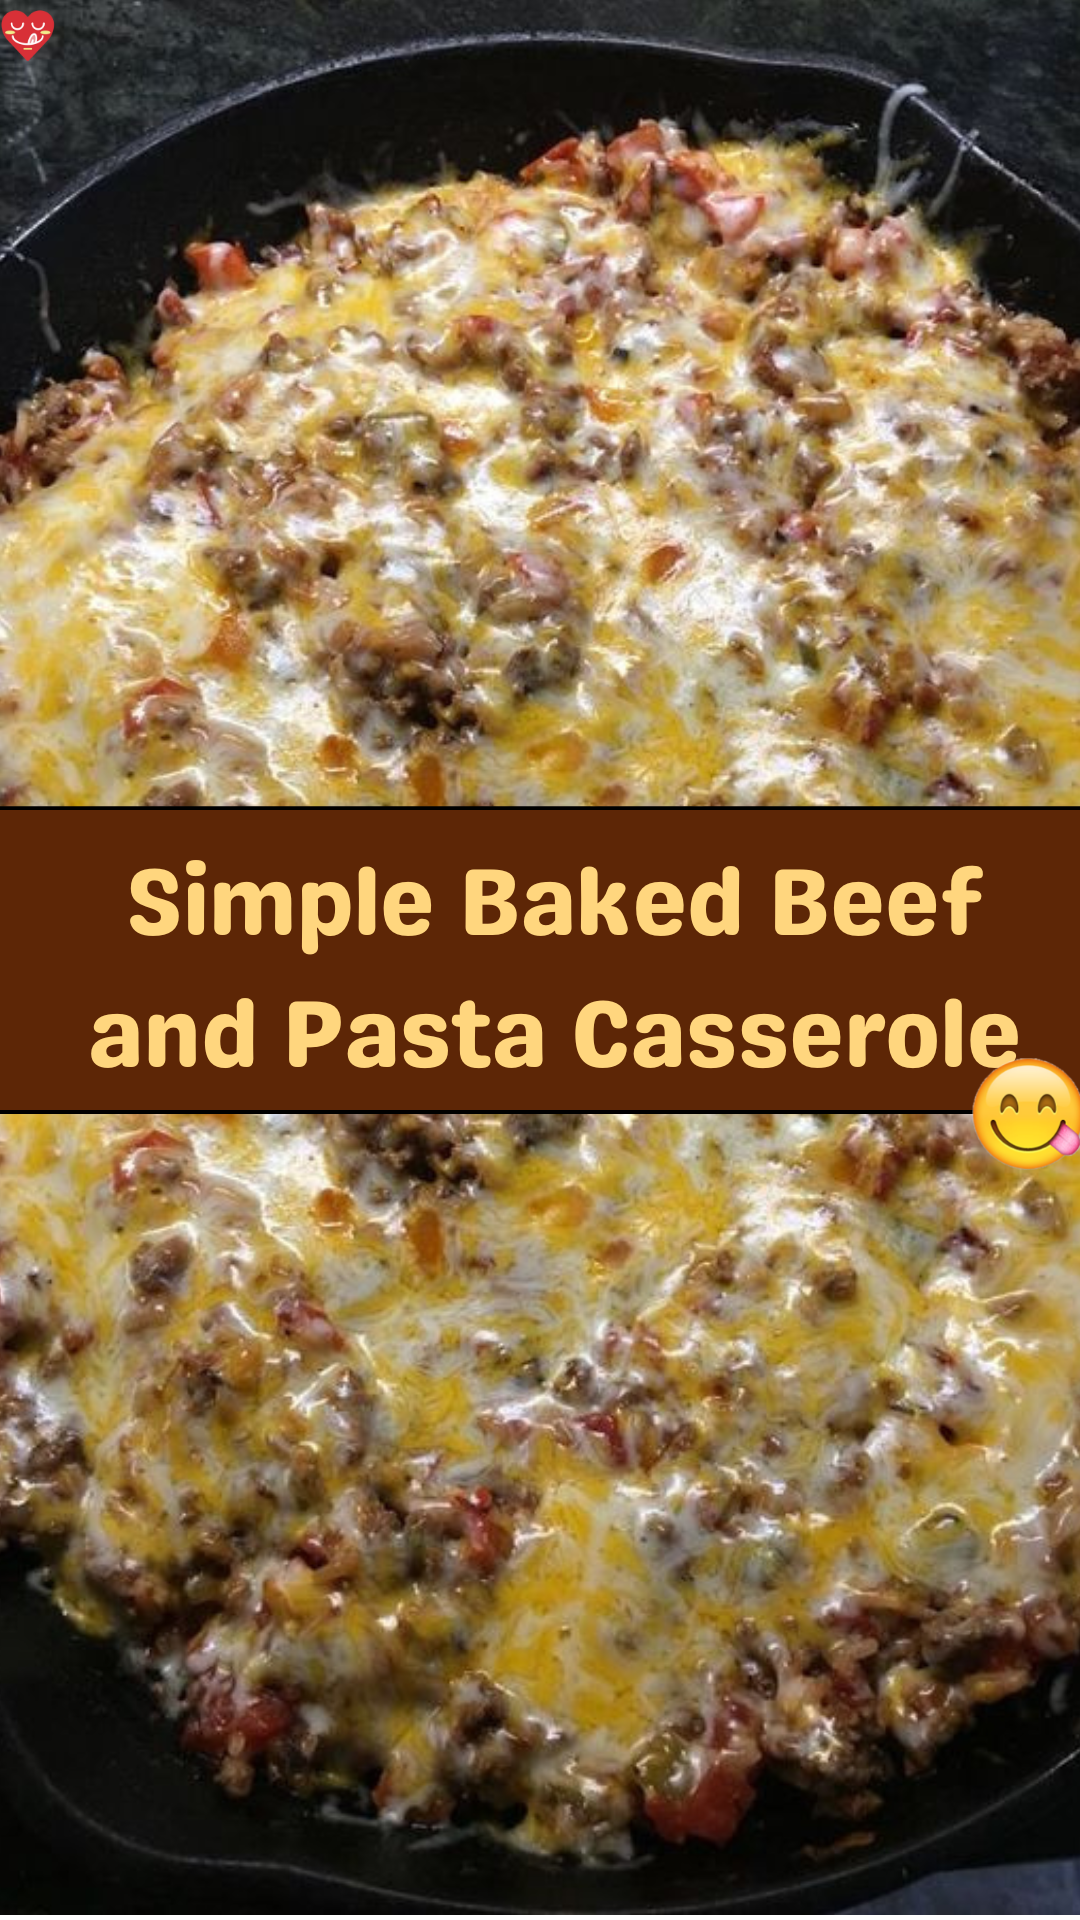 Simple Baked Beef and Pasta Casserole - Family Dinner Recipes